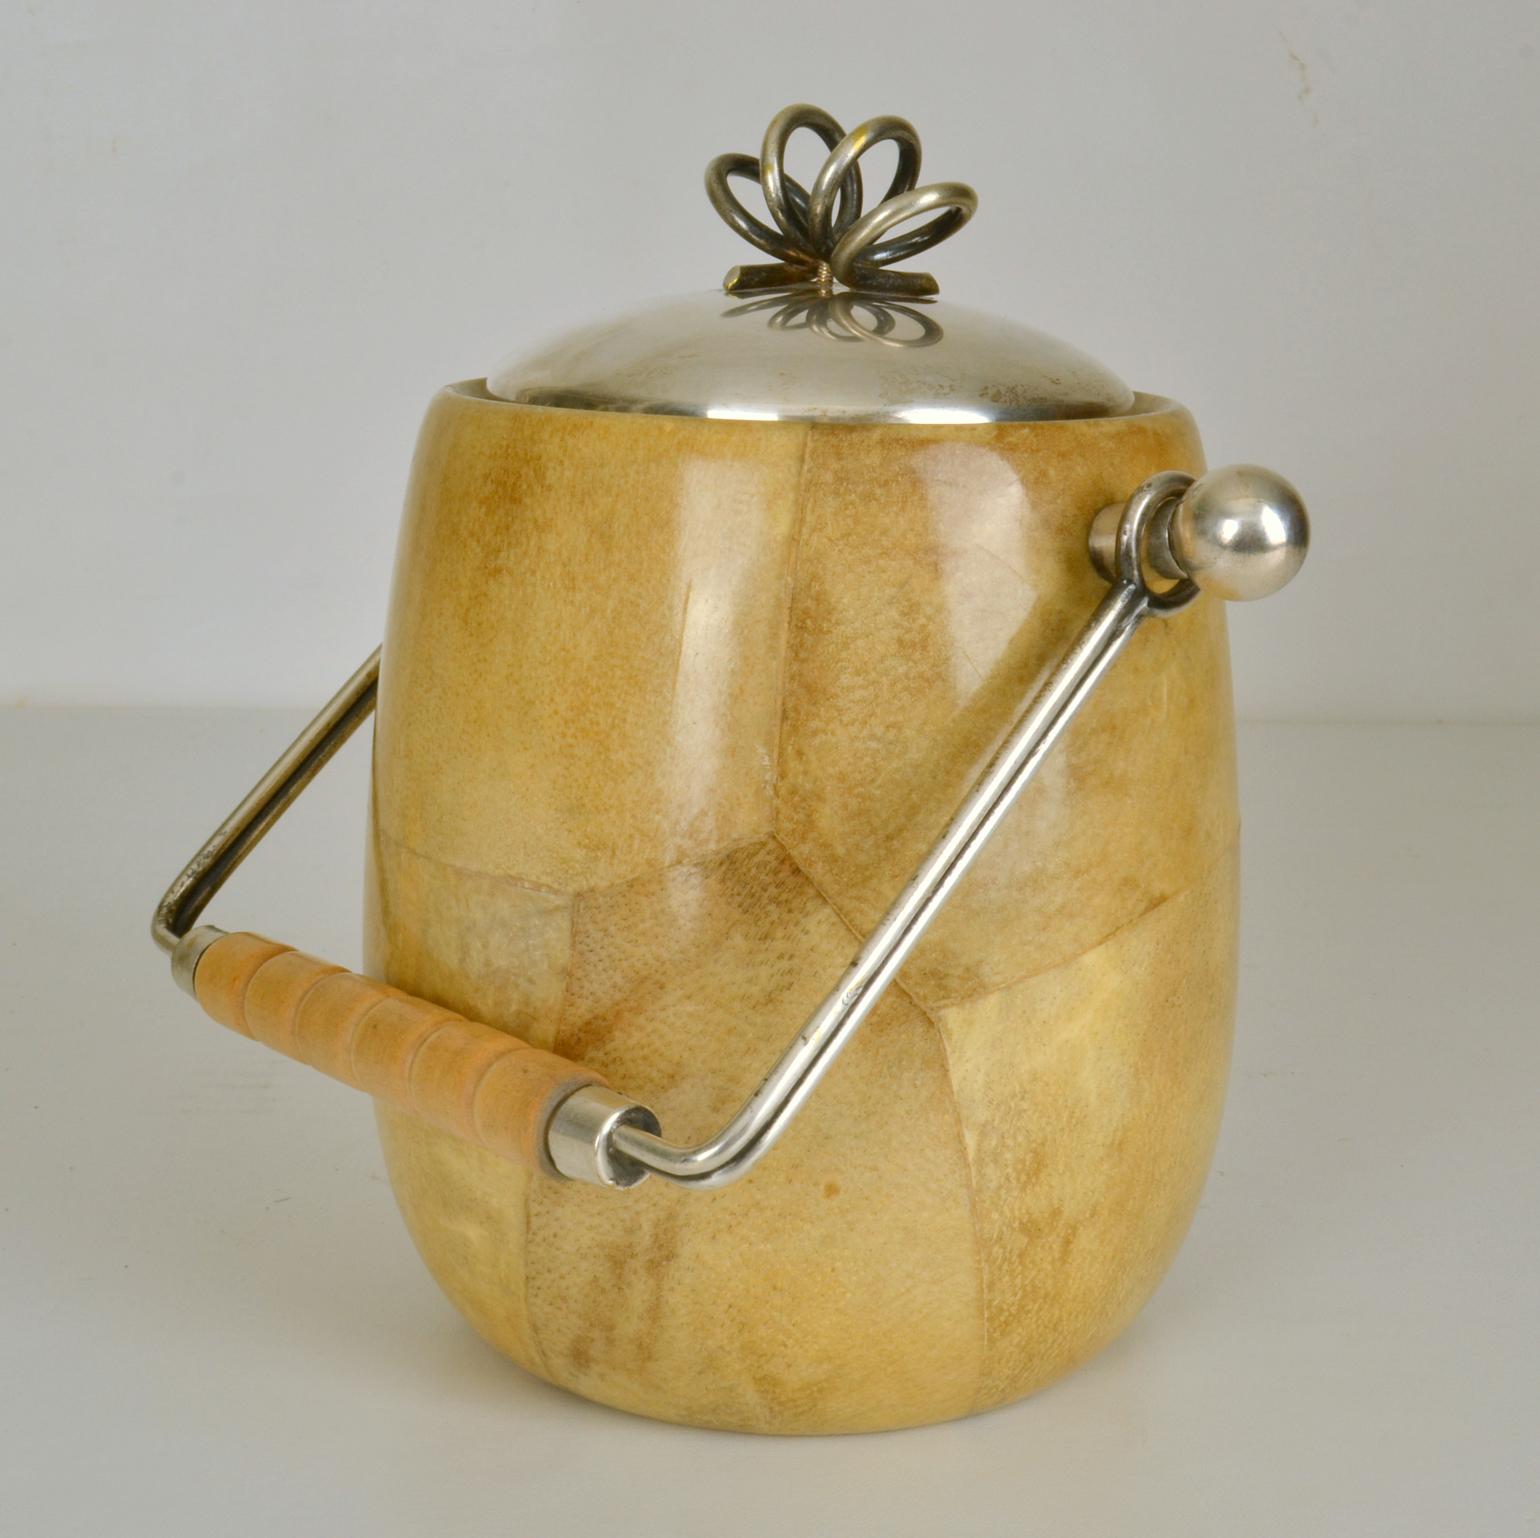 Early Aldo Tura ice bucket in a light cream tanned parchment, nickel plated bras and wooden handle and spoon made in the late 1940's Italy.
Aldo Tura (1909-1963) focused on applying a specific material like lacquered goatskin on furniture and